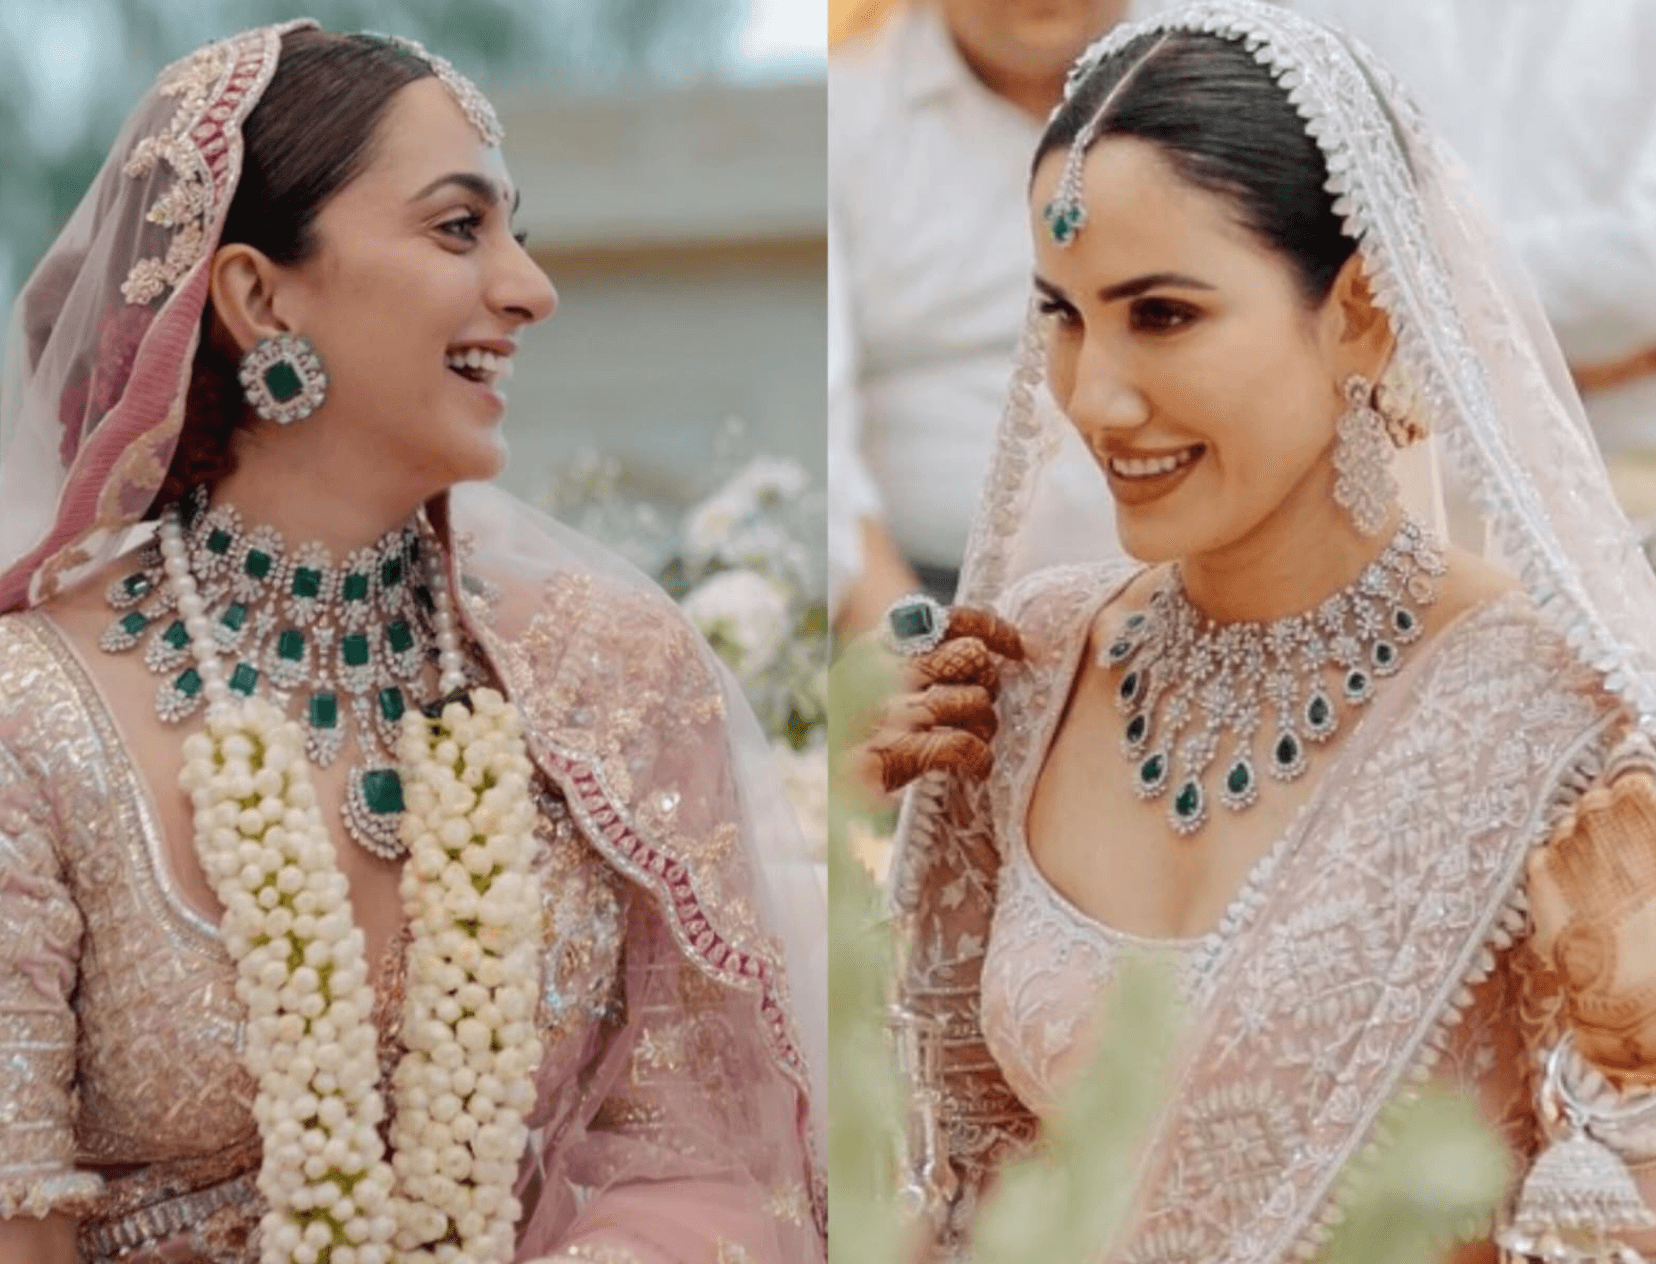 Sonnalli Seygall&#8217;s Wedding Outfit Reminds Us Too Much Of Kiara Advani&#8217;s; Here’s Why